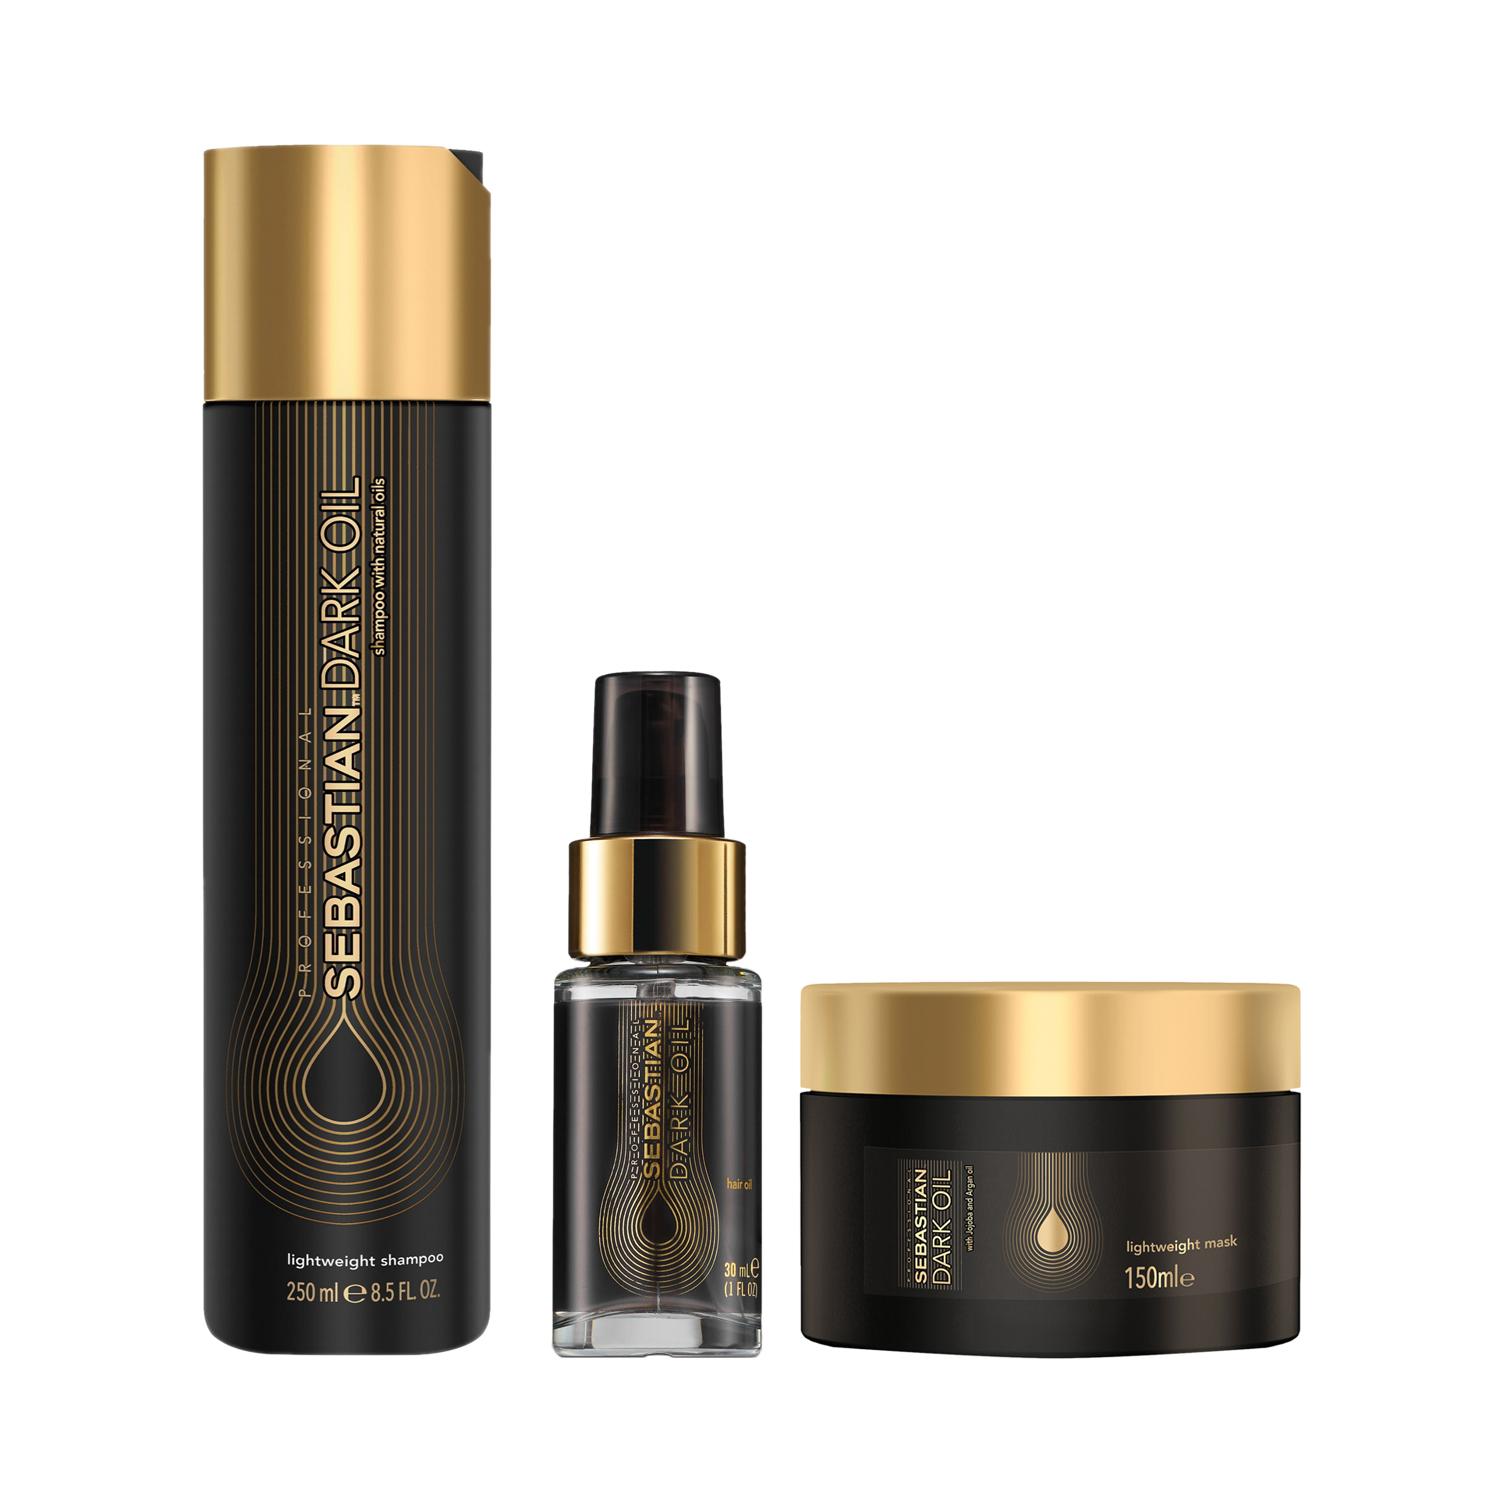 Sebastian Professional | Sebastian Professional Dark Oil Lightweight Shampoo, Mask & Styling oil- combo of 3